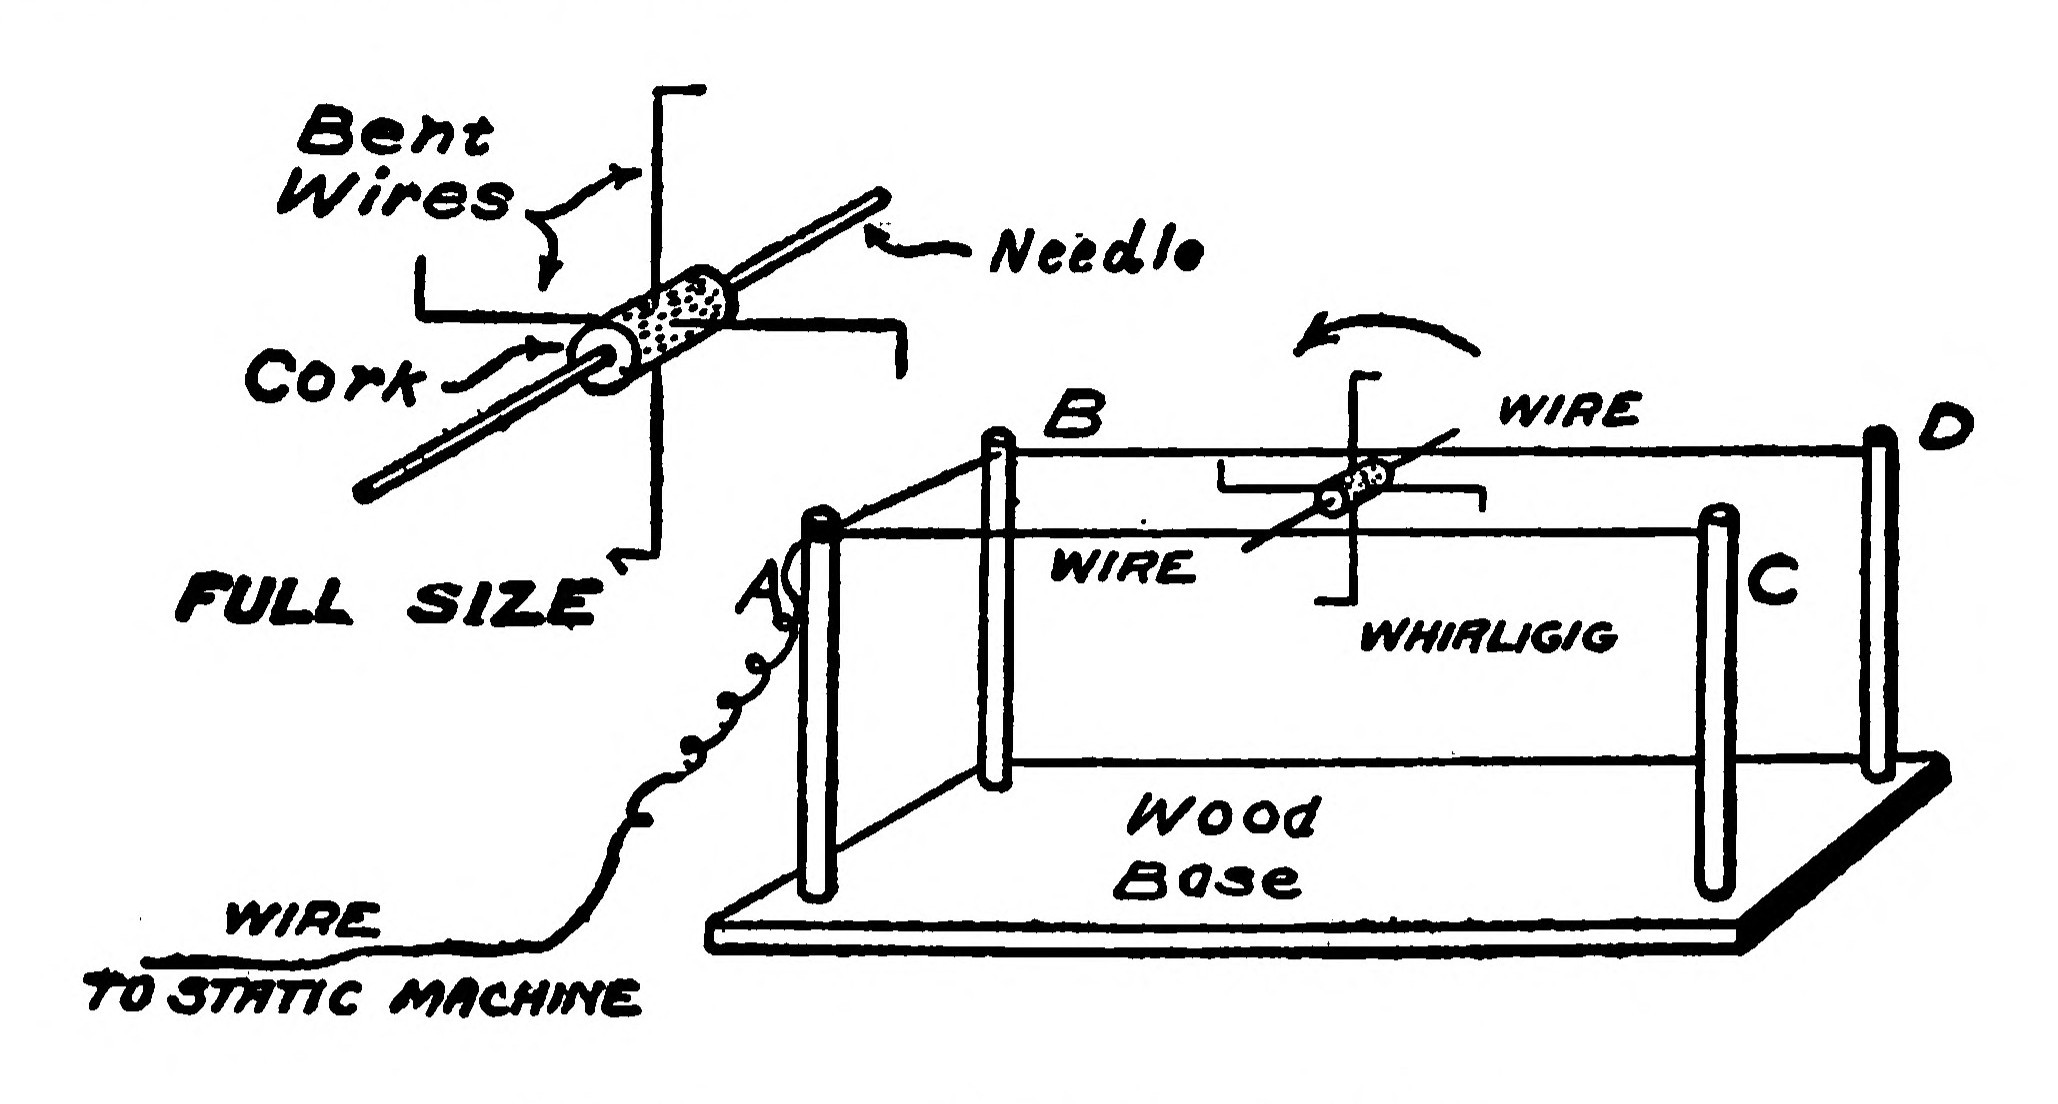 FIG. 25.—An Electric Whirligig.